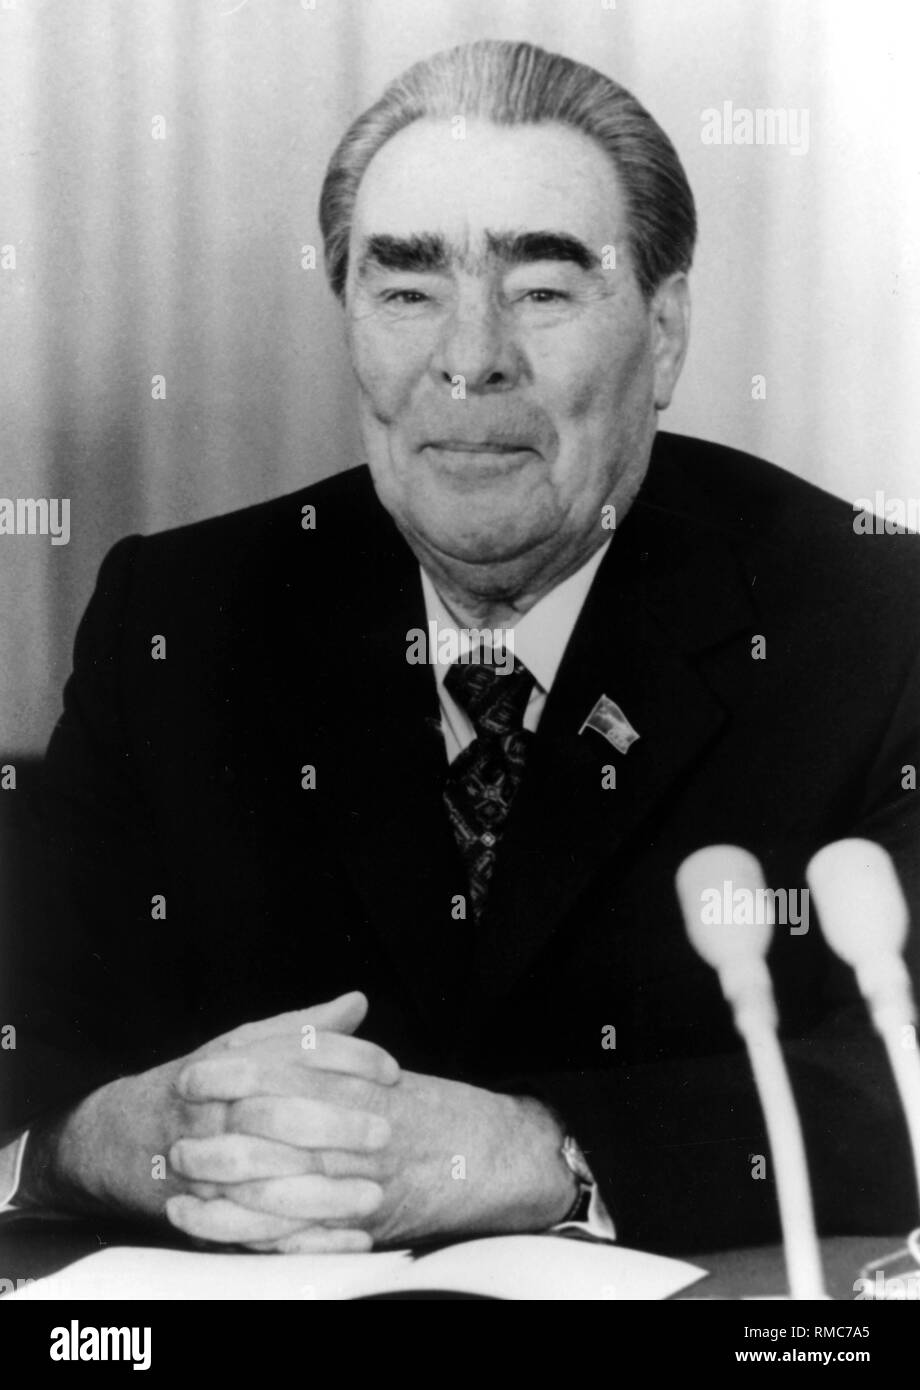 Leonid Ilyich Brezhnev - 19.12.1906 - 10.11.1982. Undated portrait photo of the Soviet Head of State and Party Leader at a press conference on his visit to Bonn, 1981.  Between 1964-1982 he was General Secretary of the CPSU. Between 1960-1964 and 1977- 1982 President of the Soviet Union. Stock Photo